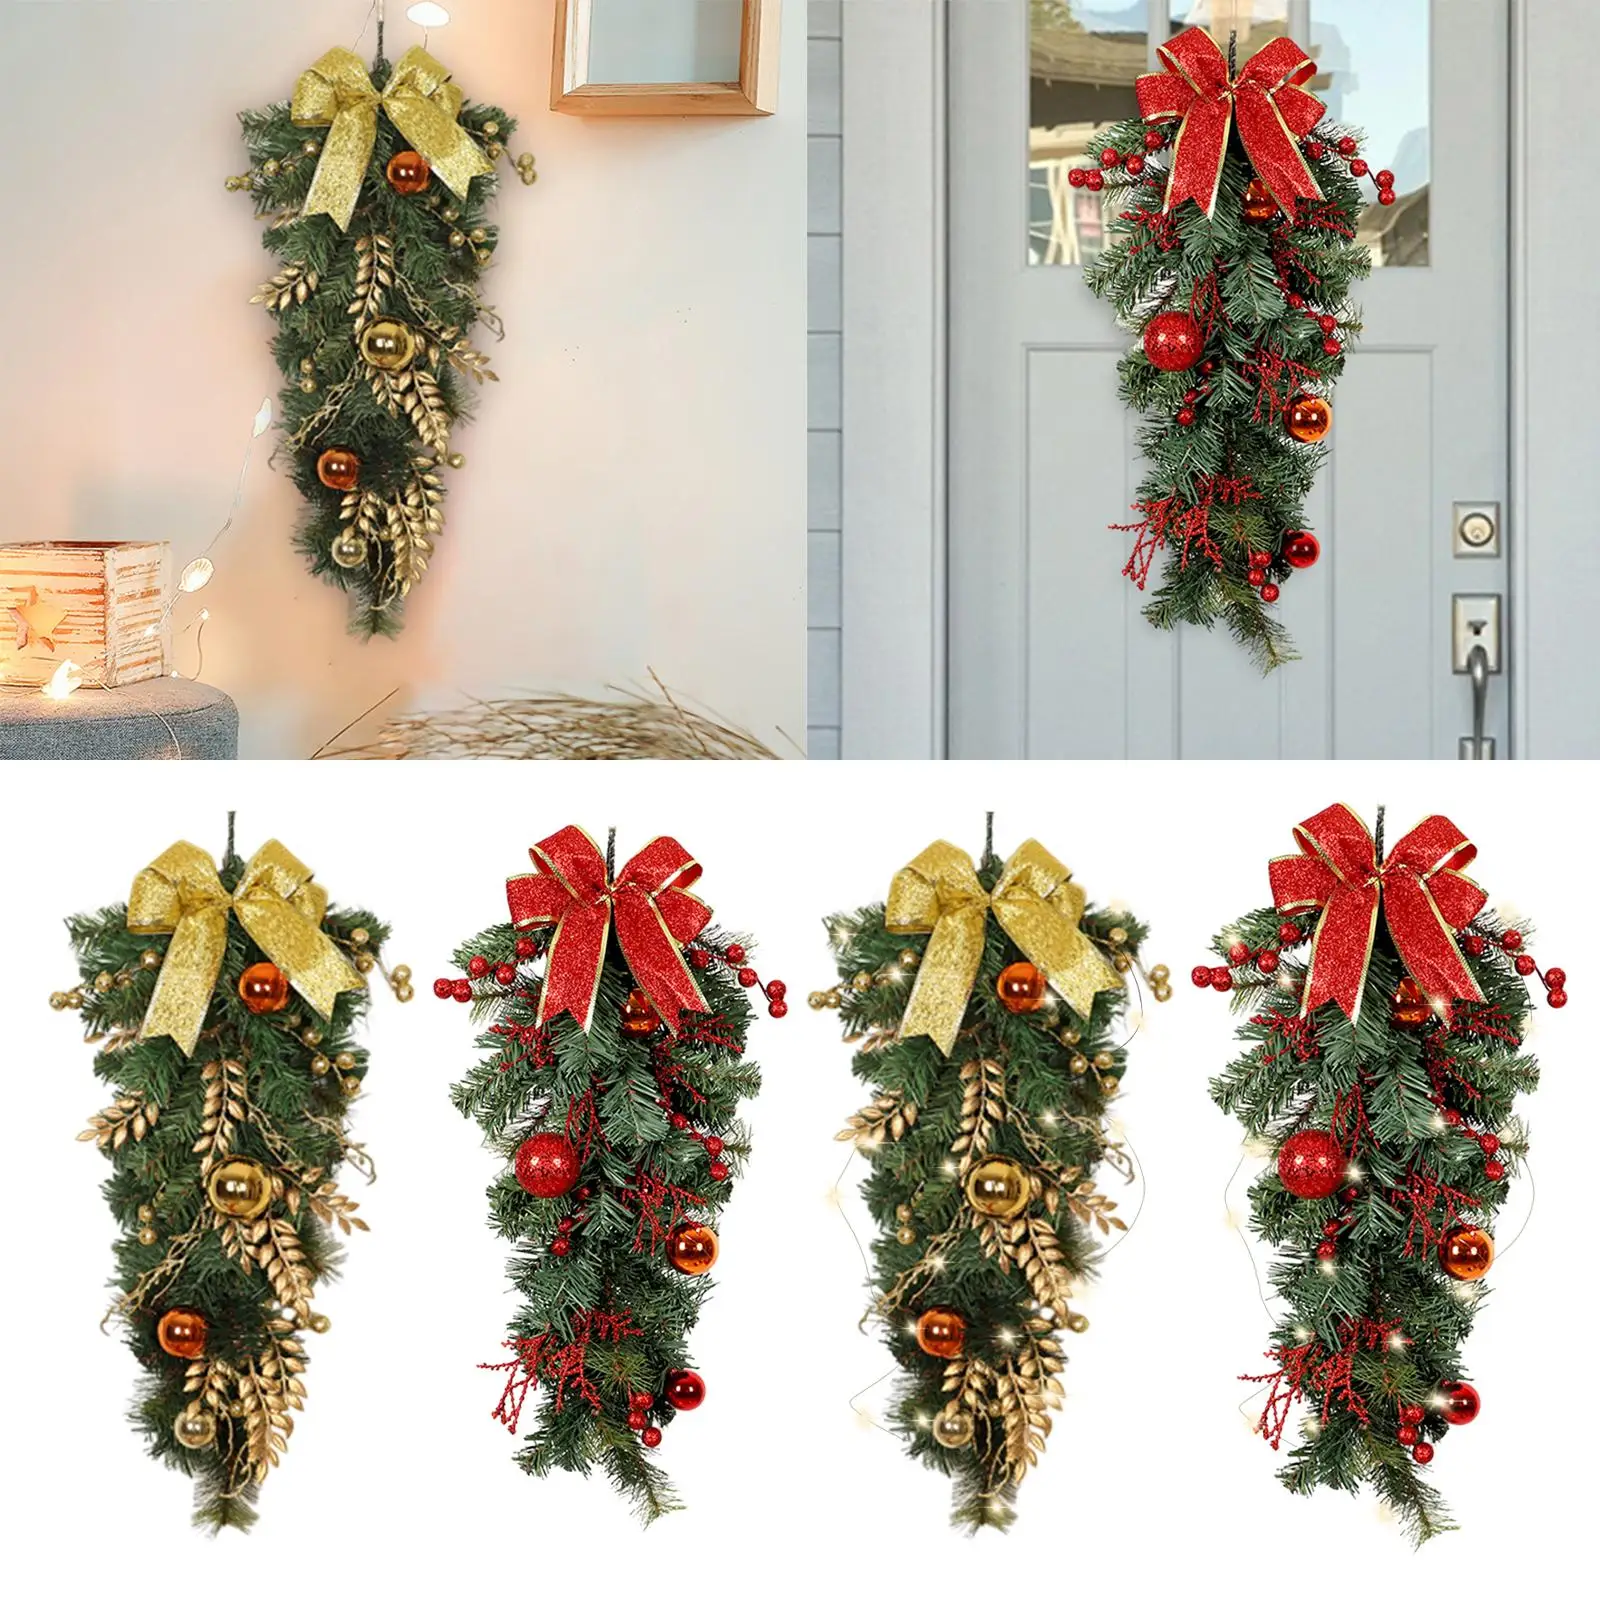 Hanging Christmas Upside Down Tree Ornament for Indoor Outdoor Windows Porch